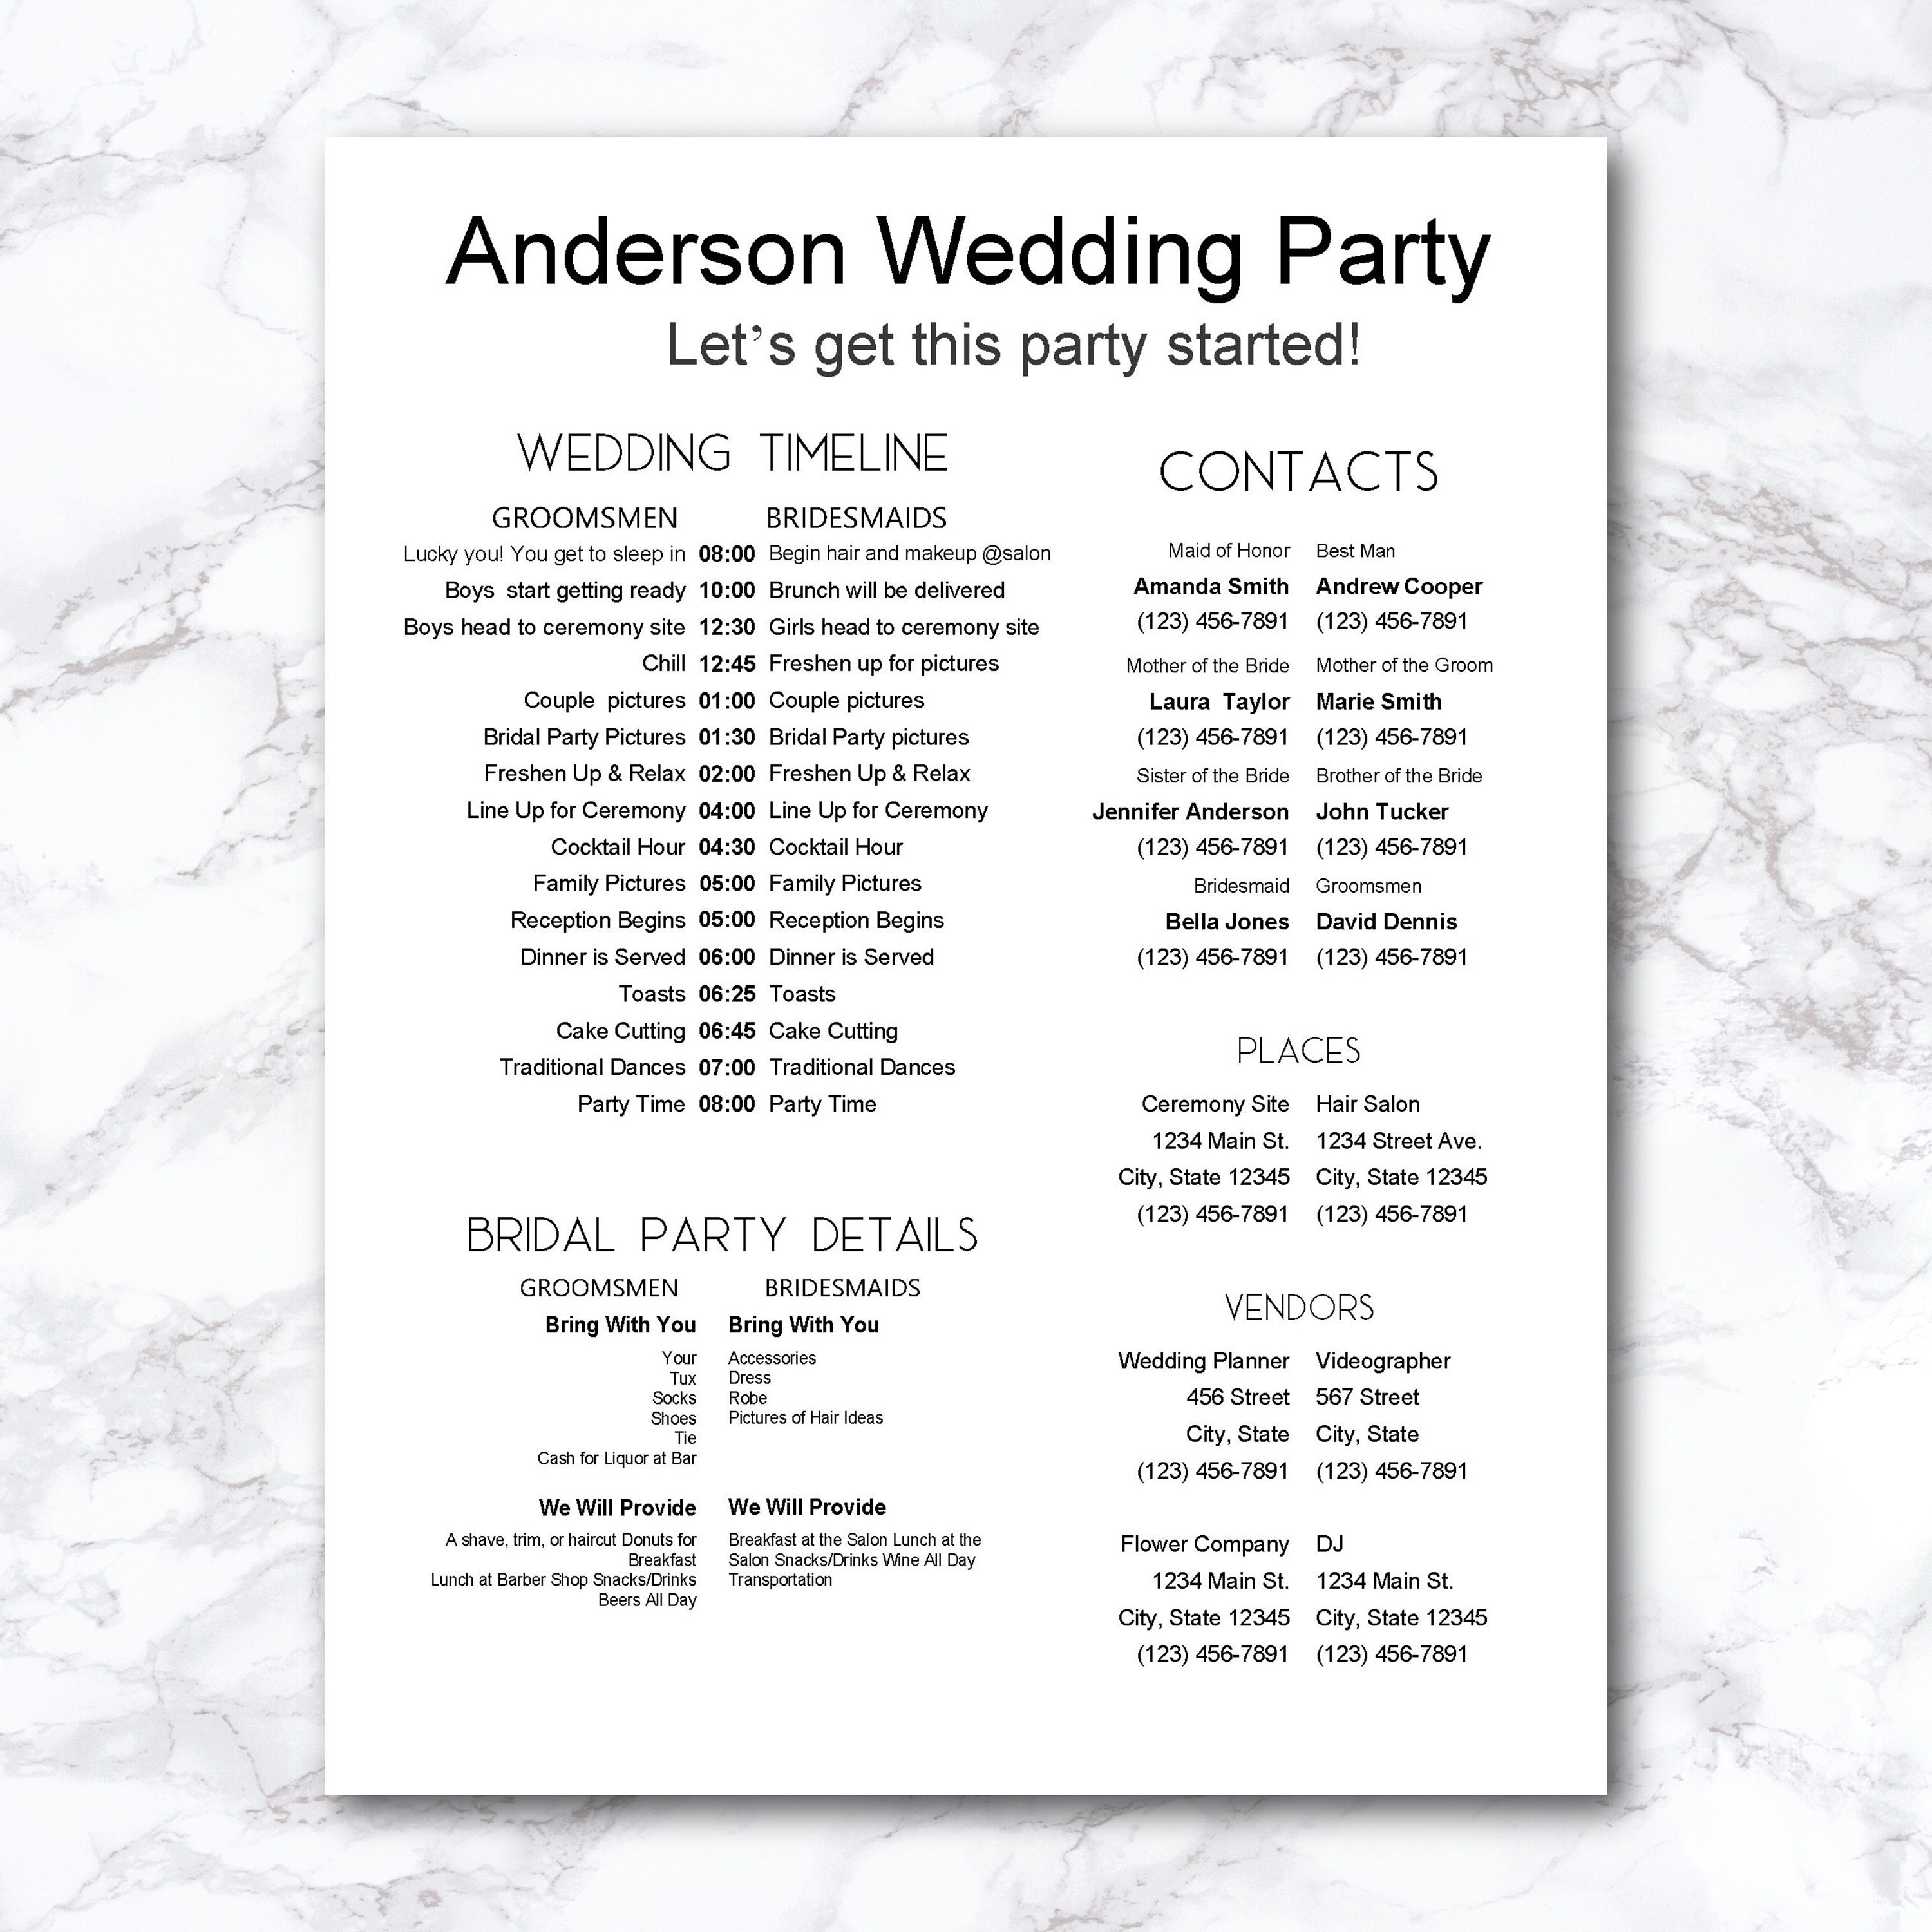 editable-wedding-timeline-edit-in-word-phone-numbers-and-wedding-day